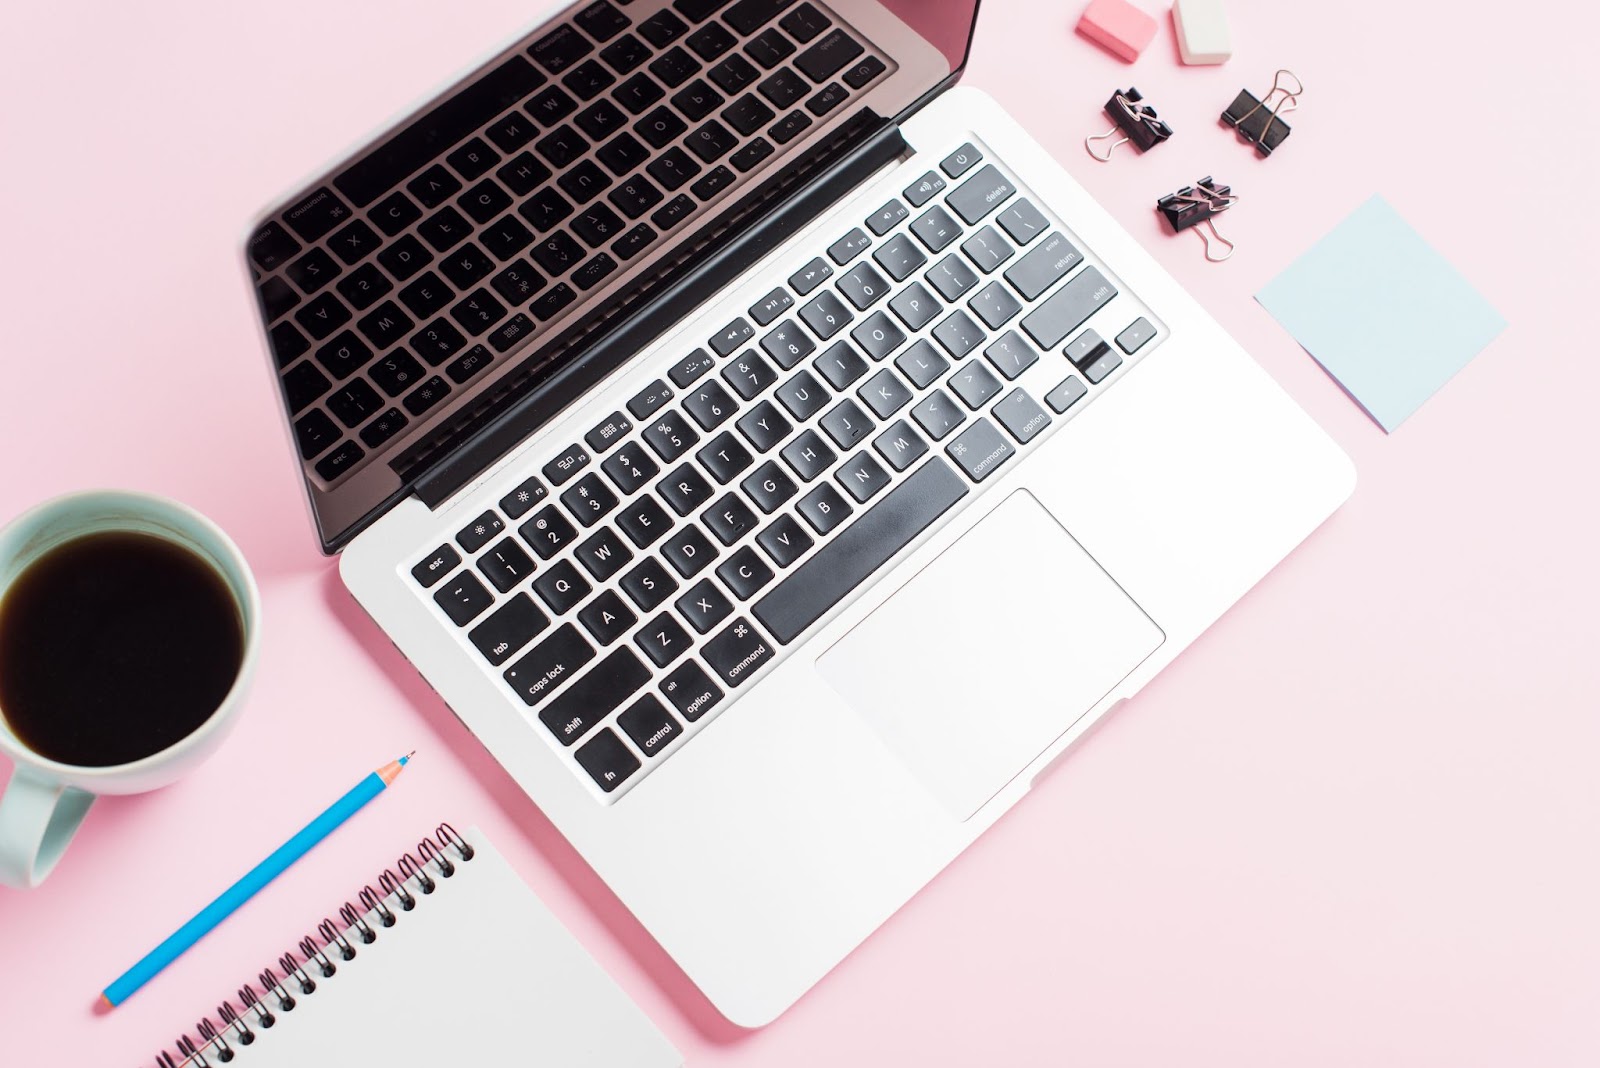 Macbook keyboard and pink background